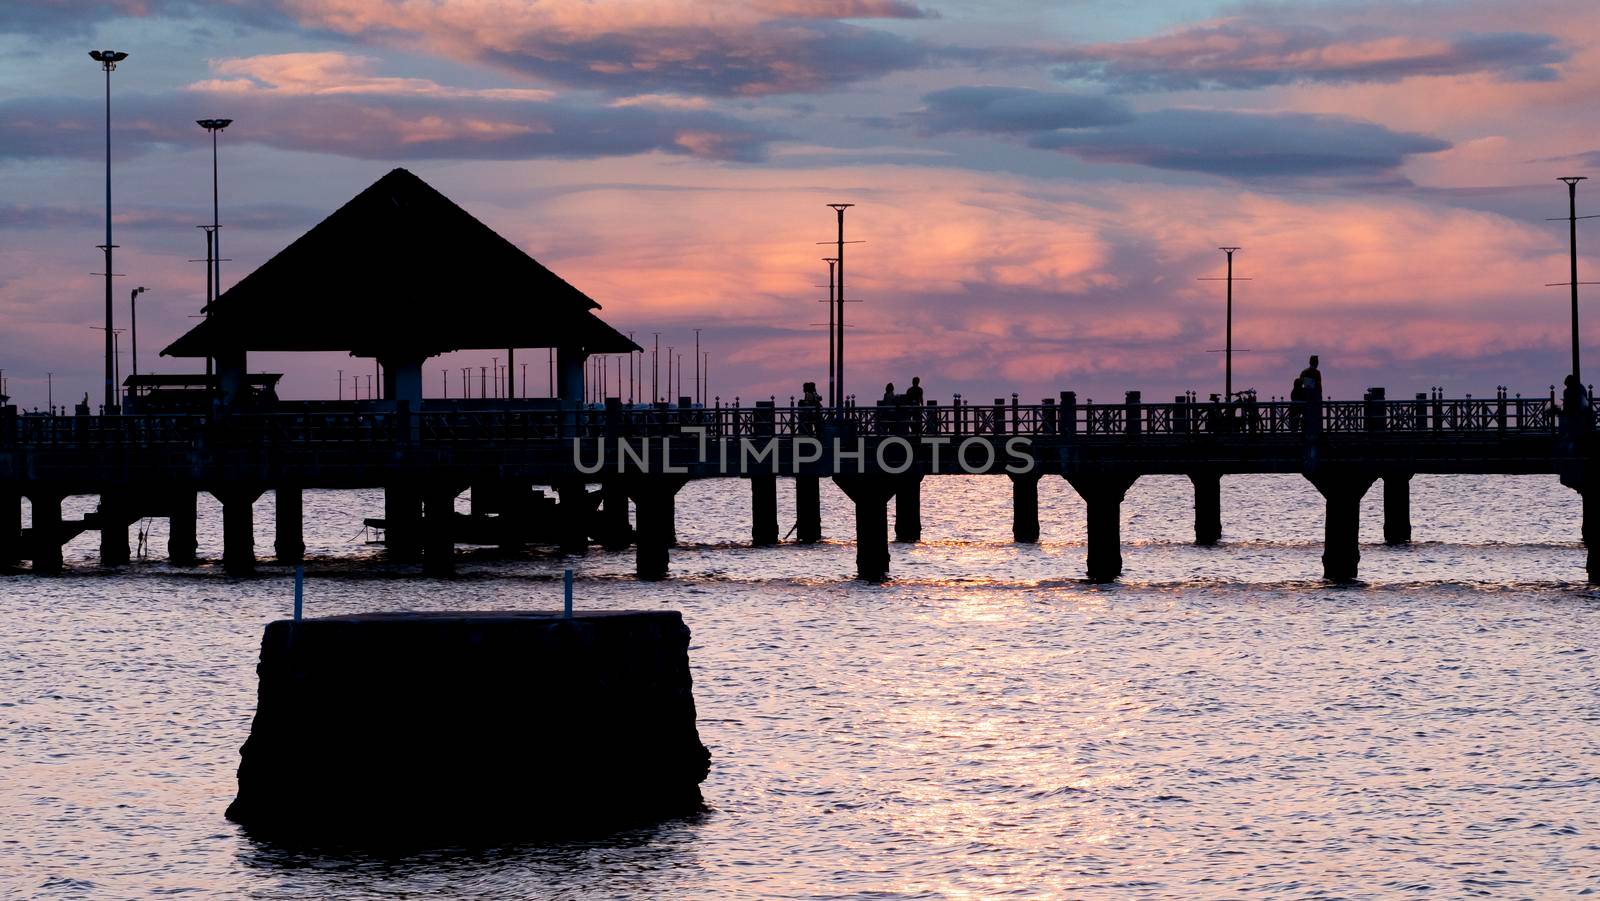 Bangsan Chonburi Thailand jetty and sunset. At Bangsan beach. Ao Thai Ocean. Beautiful sunset landscape, wooden shore jetty and colorful sky and cloud. Artistic beach sunset under wonderful sky. Recreation concept.